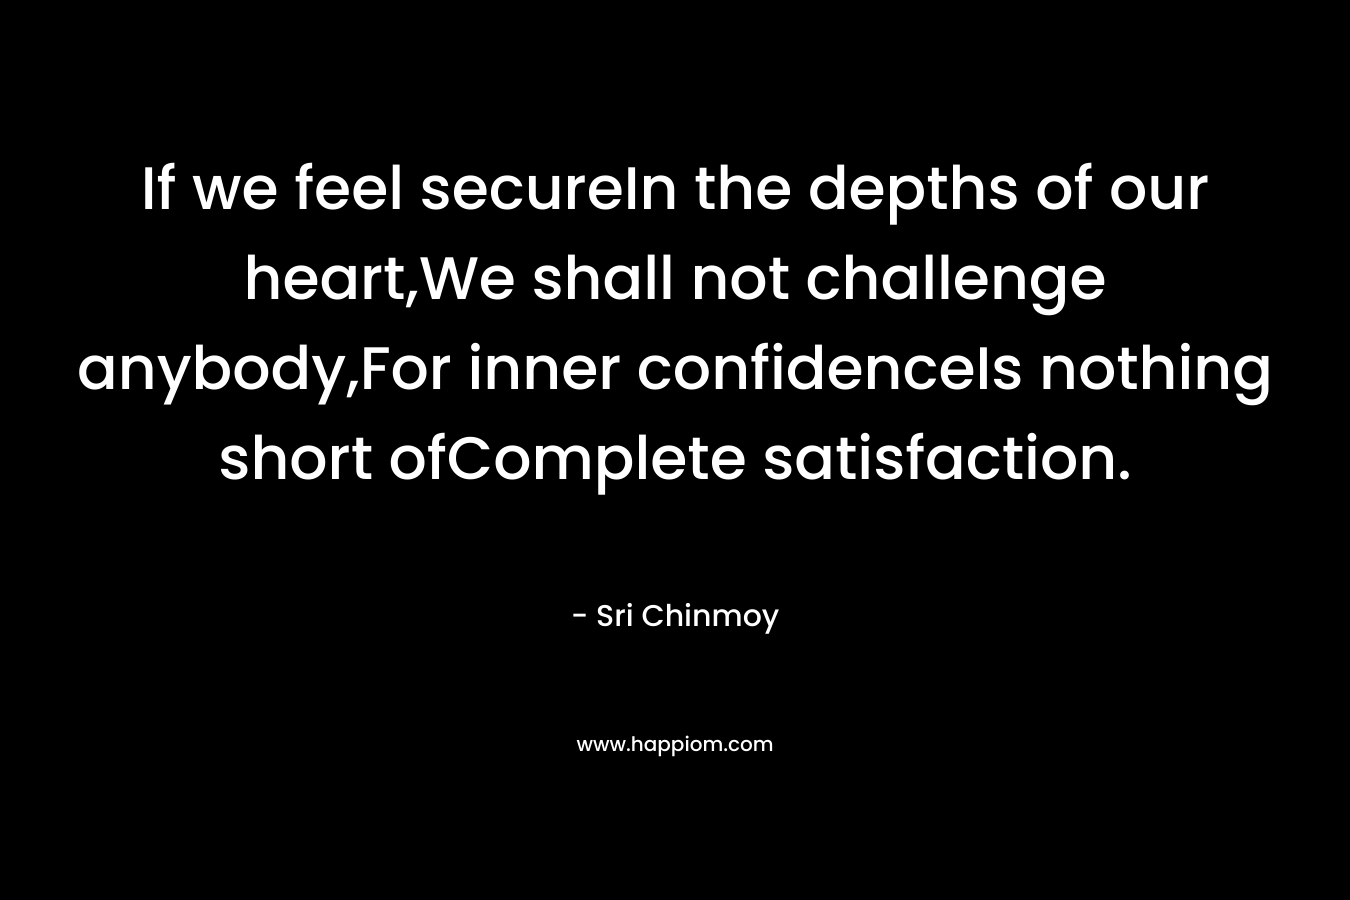 If we feel secureIn the depths of our heart,We shall not challenge anybody,For inner confidenceIs nothing short ofComplete satisfaction. – Sri Chinmoy